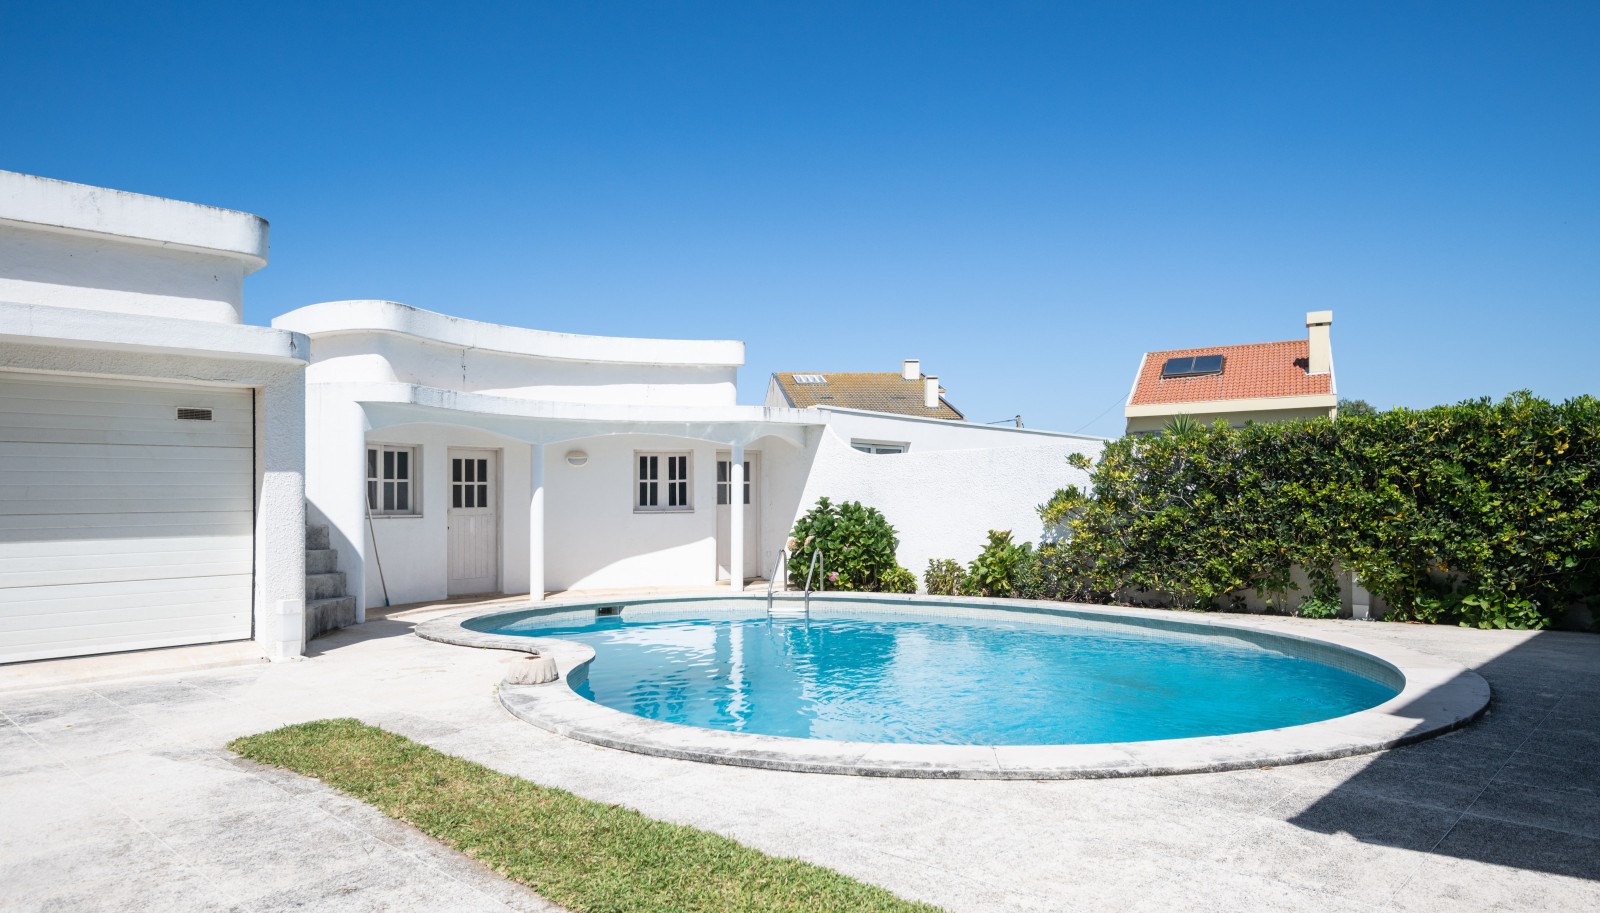 Sale: 3-bedroom villa with pool, on the 2nd line of the sea, in Miramar, V. N. Gaia, Portugal_235235